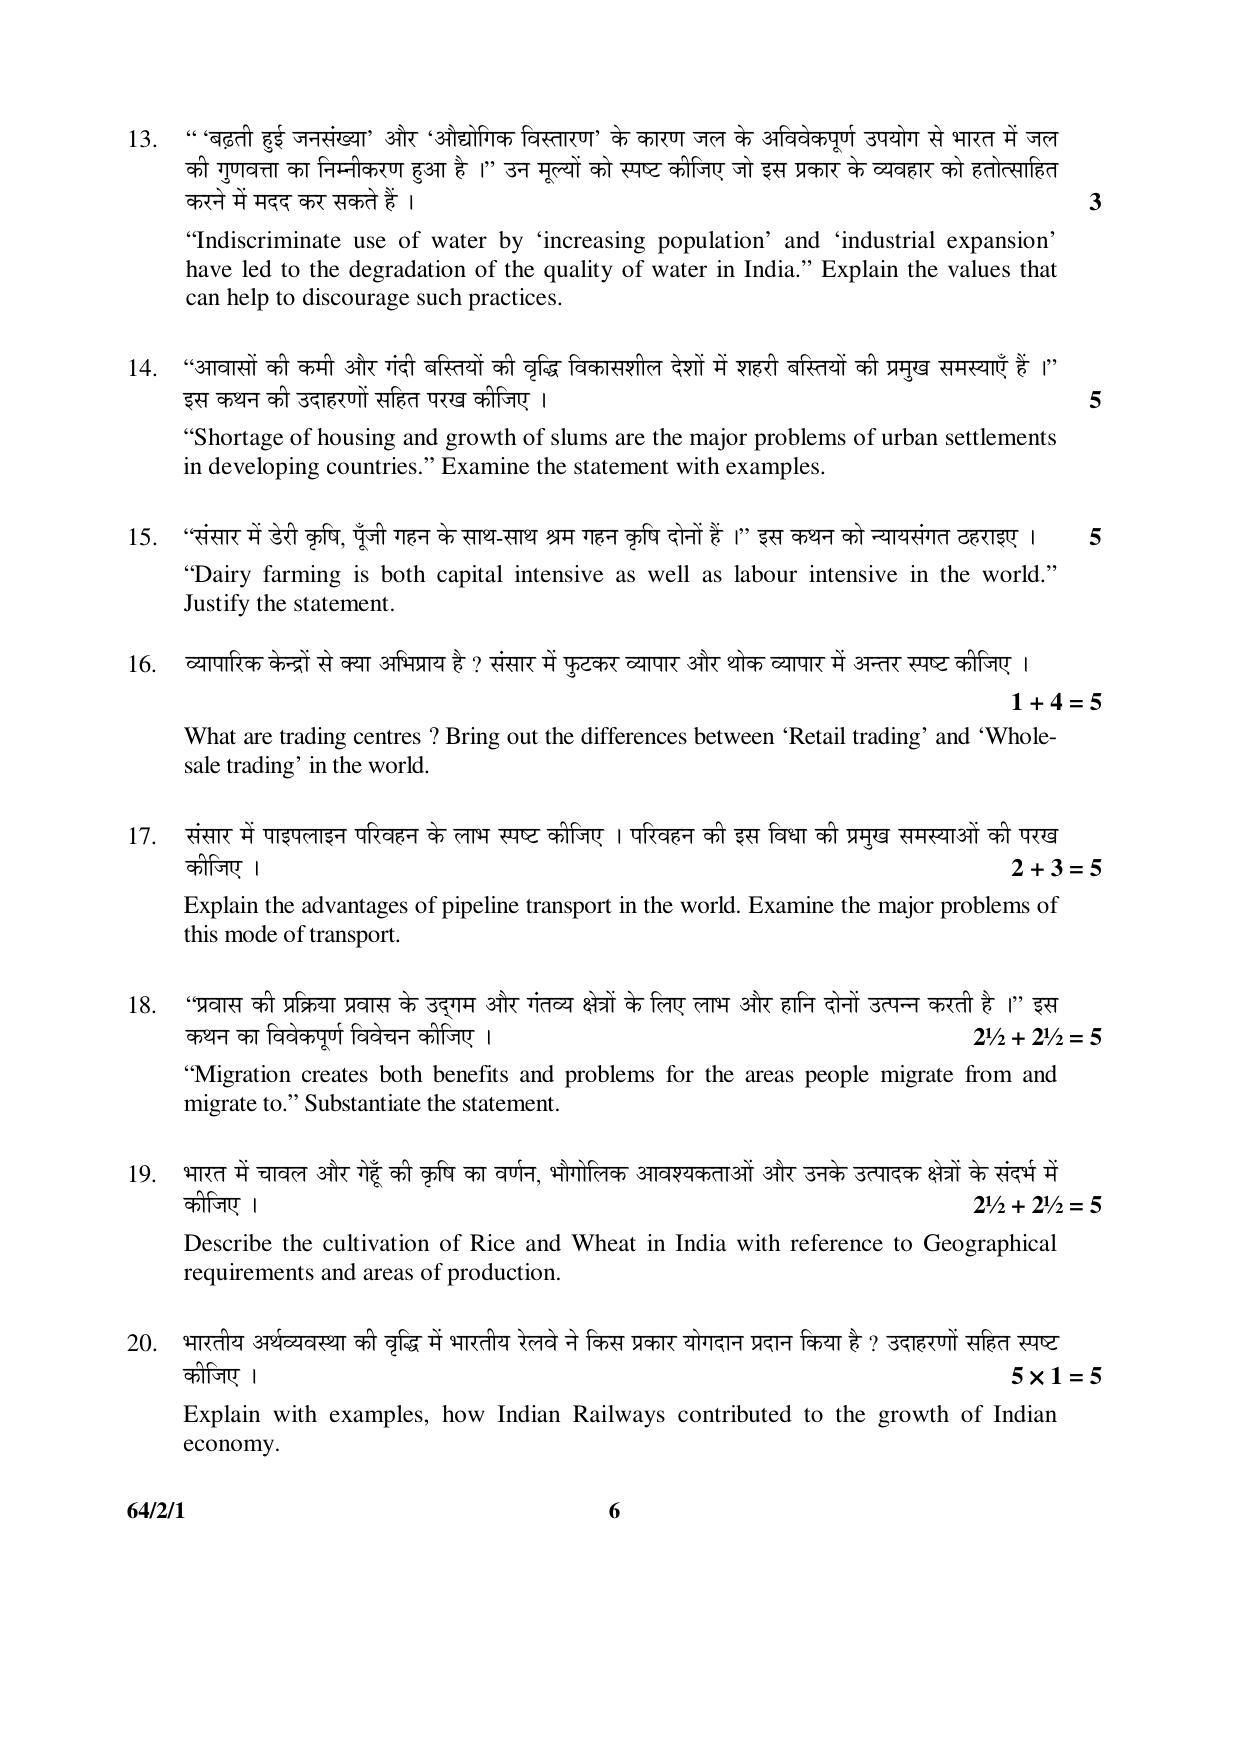 CBSE Class 12 64-2-1 Geography 2016 Question Paper - Page 6